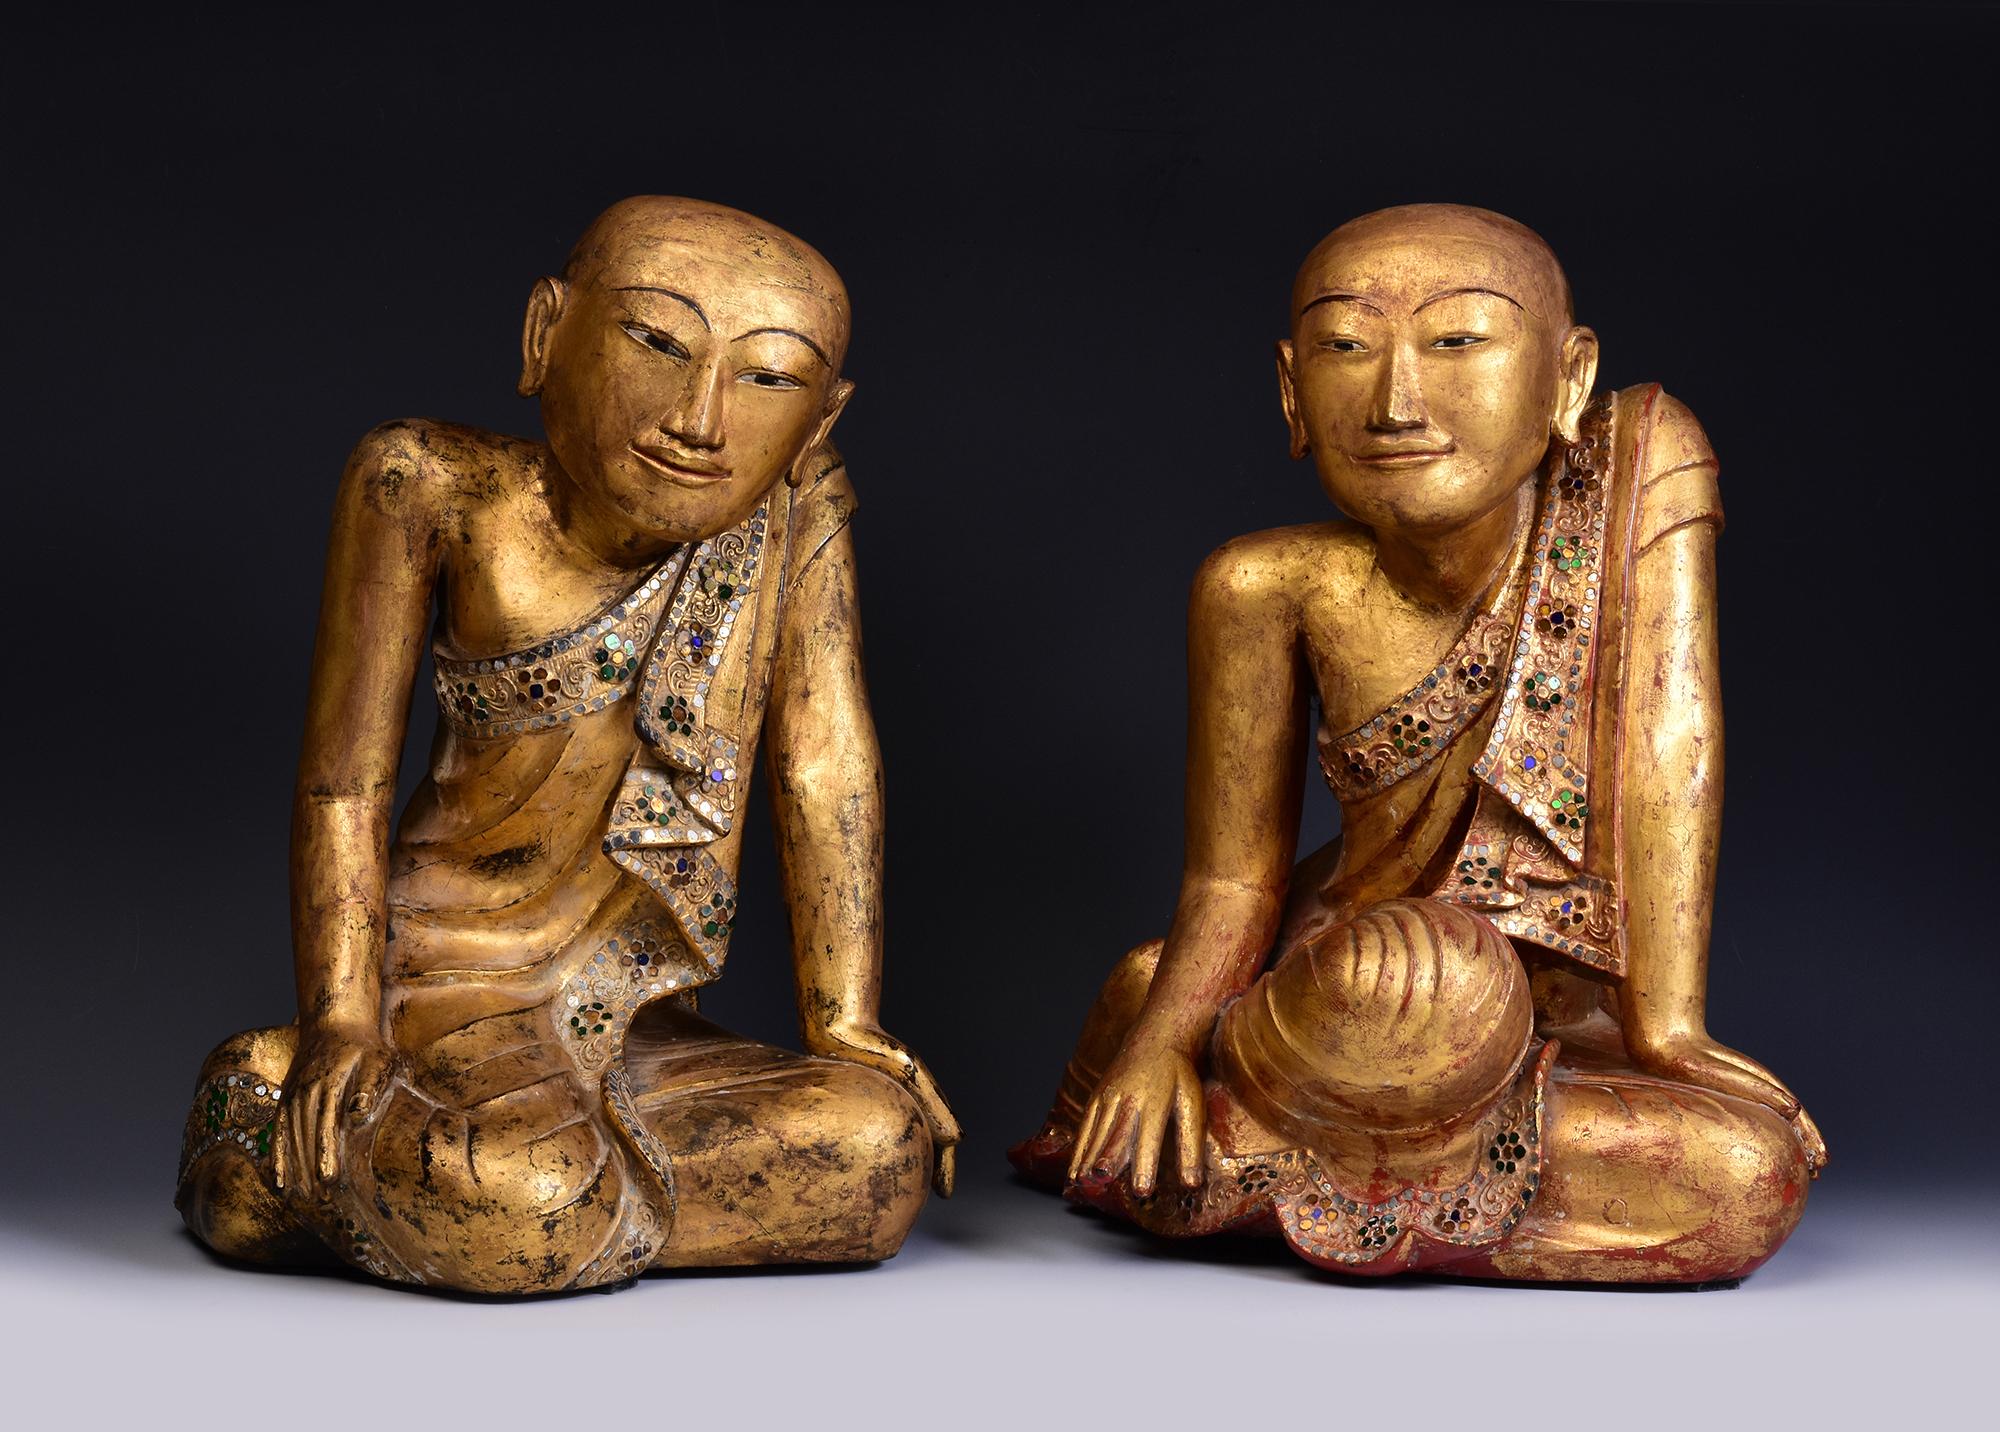 A pair of very rare and superb antique Burmese lacquer seated disciples with gilding and glass inlay.

Age: Burma, Early Mandalay Period, Early 19th Century
Size: Height 39 - 40 C.M. / Width 29 - 31 C.M.
Condition: Nice condition overall (some